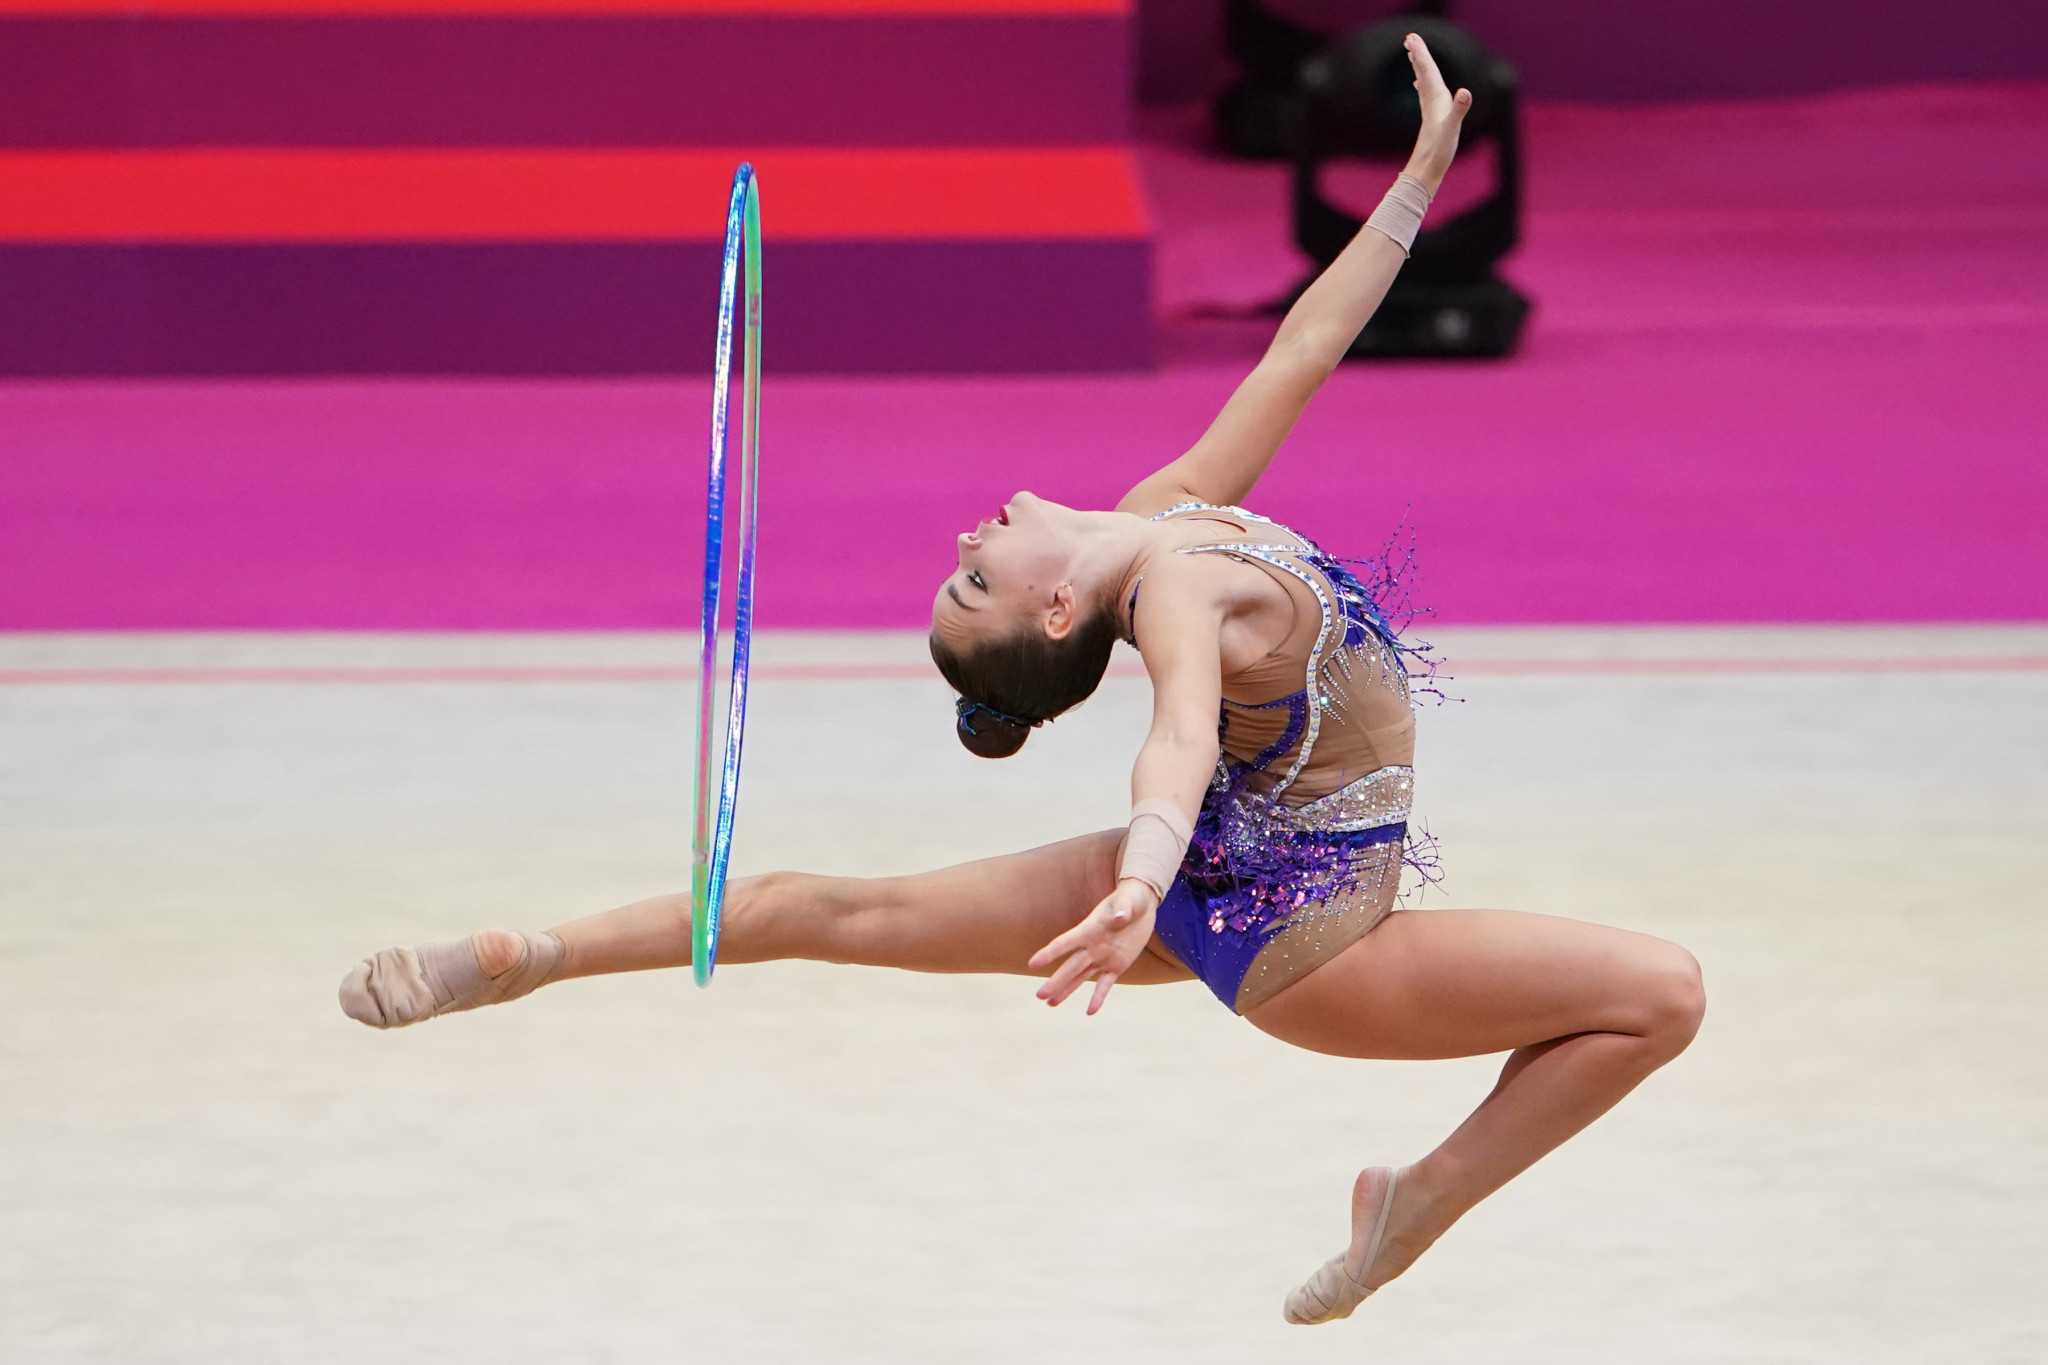 Dina Averina won her fourth consecutive individual all-around gold at the Rhythmic Gymnastics World Championships ©Getty Images